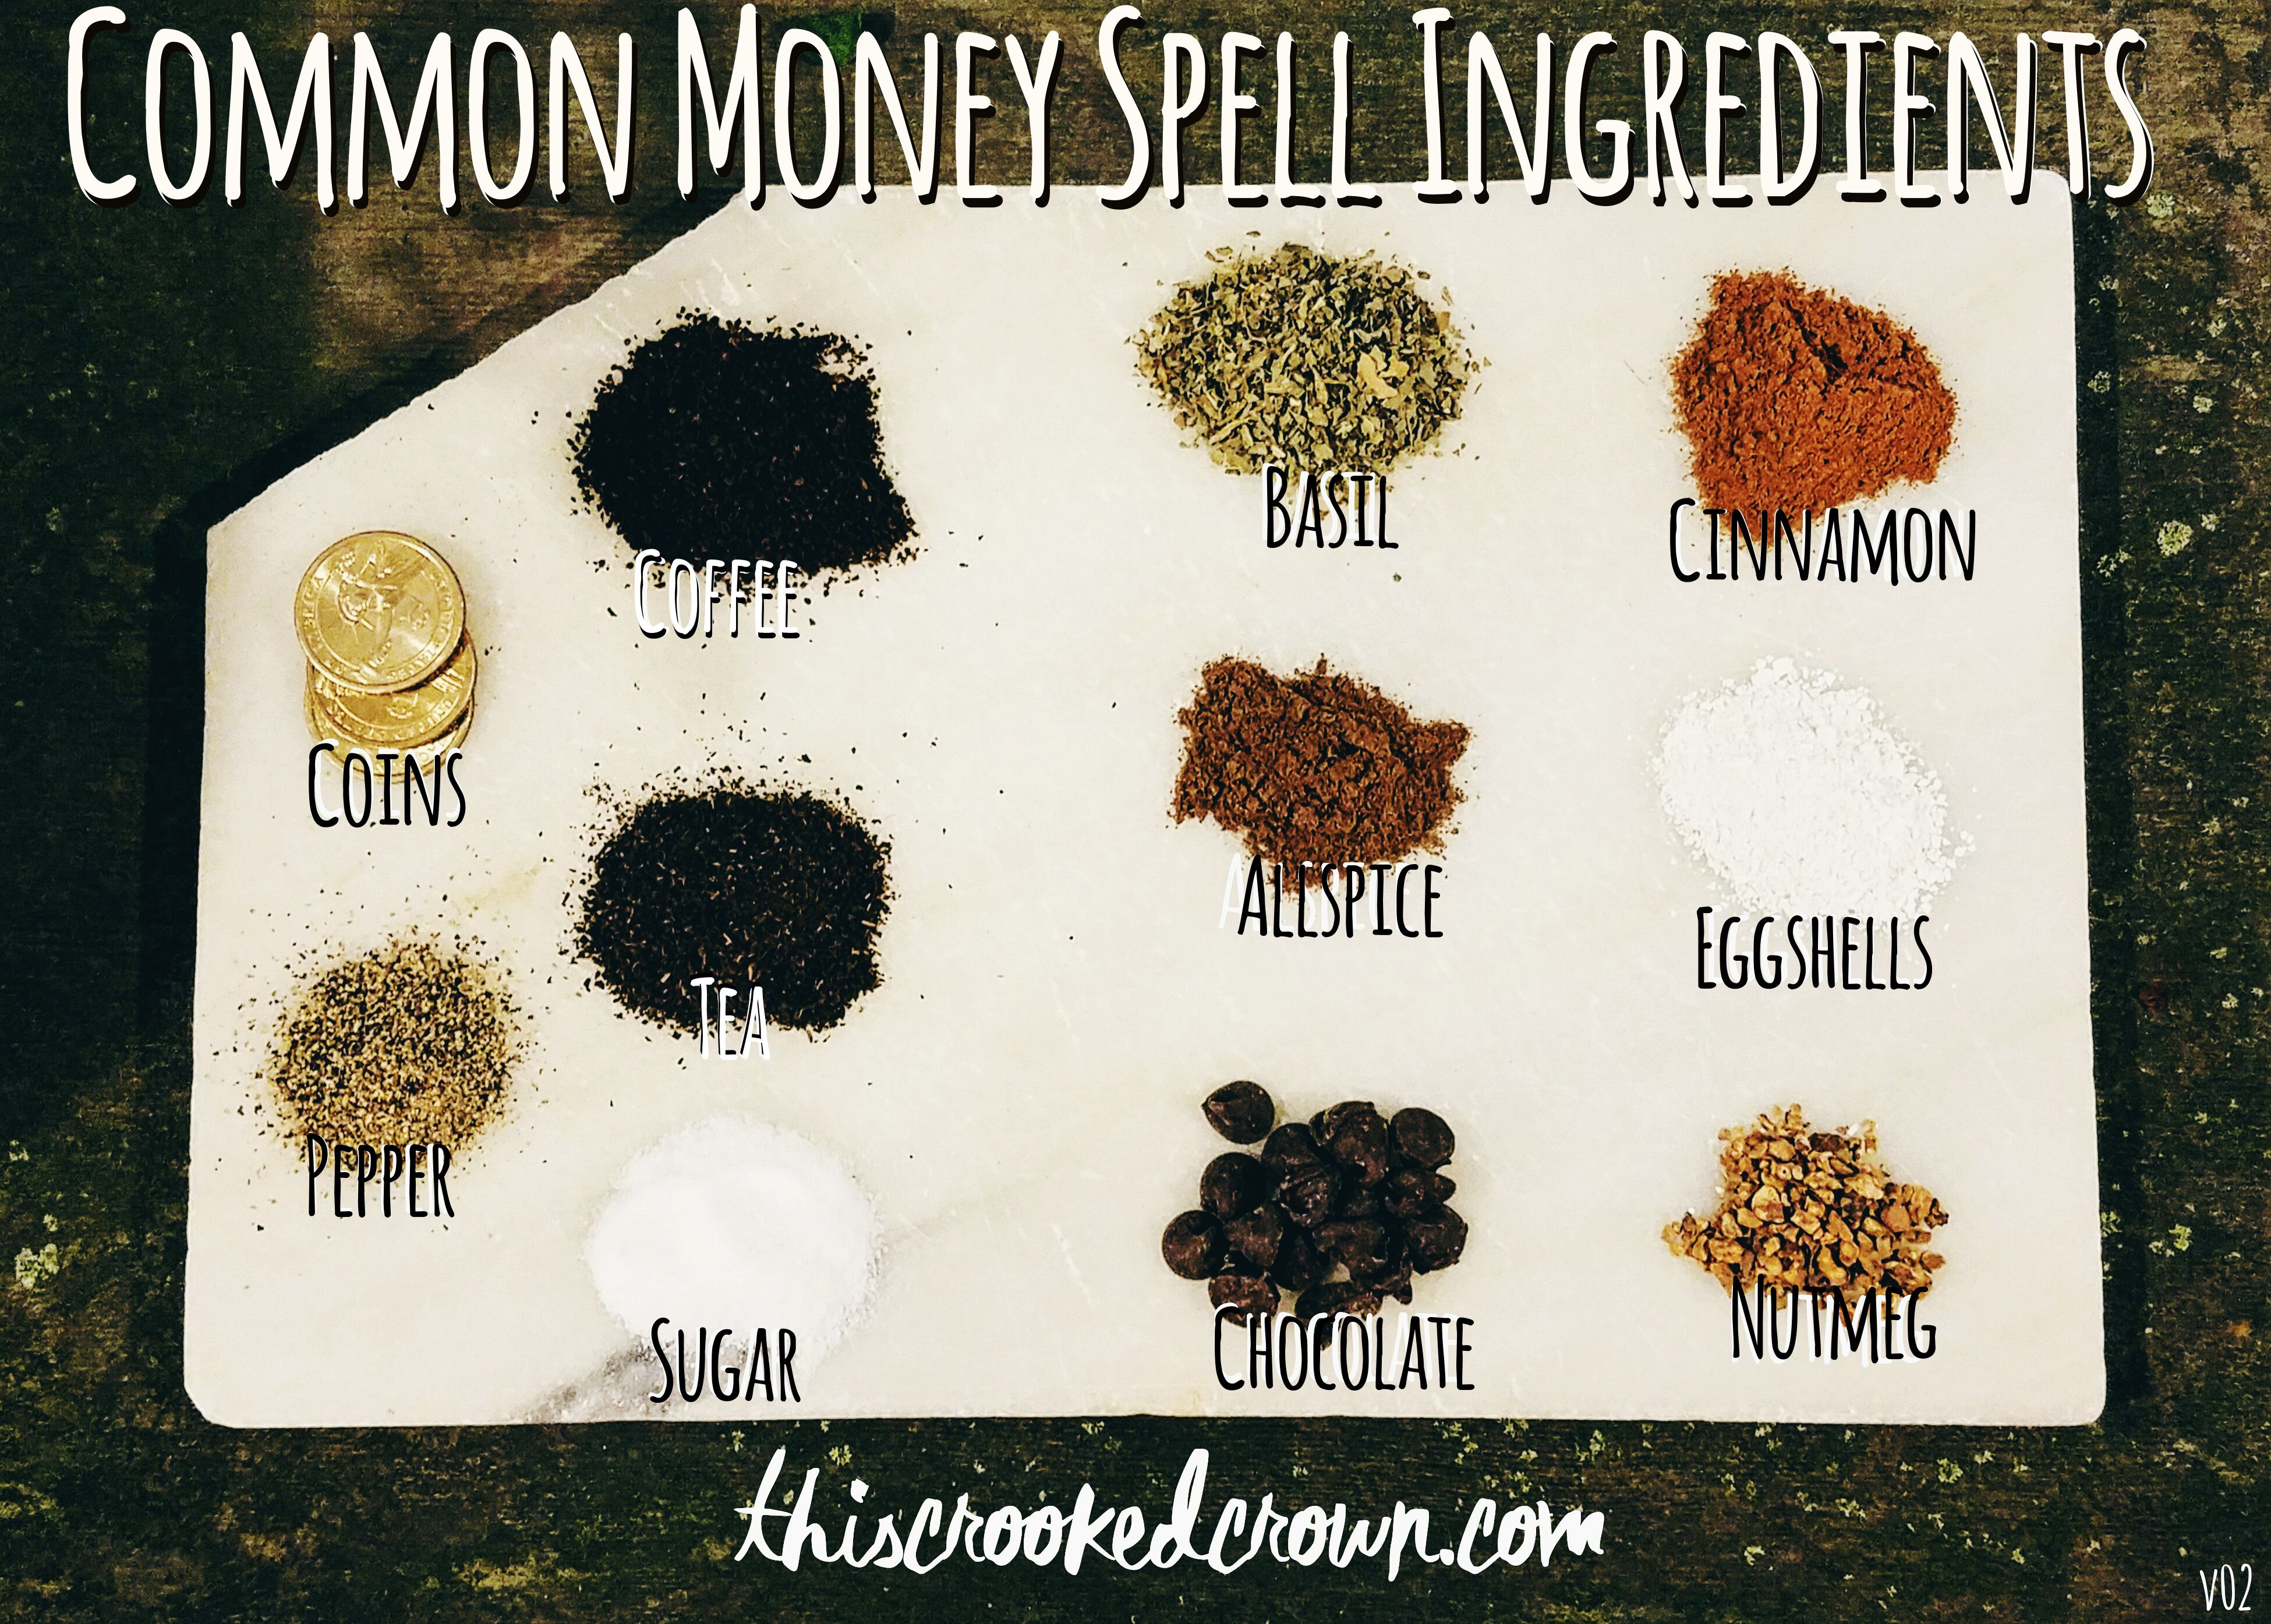 Common Money Spell Ingredients by This Crooked Crown